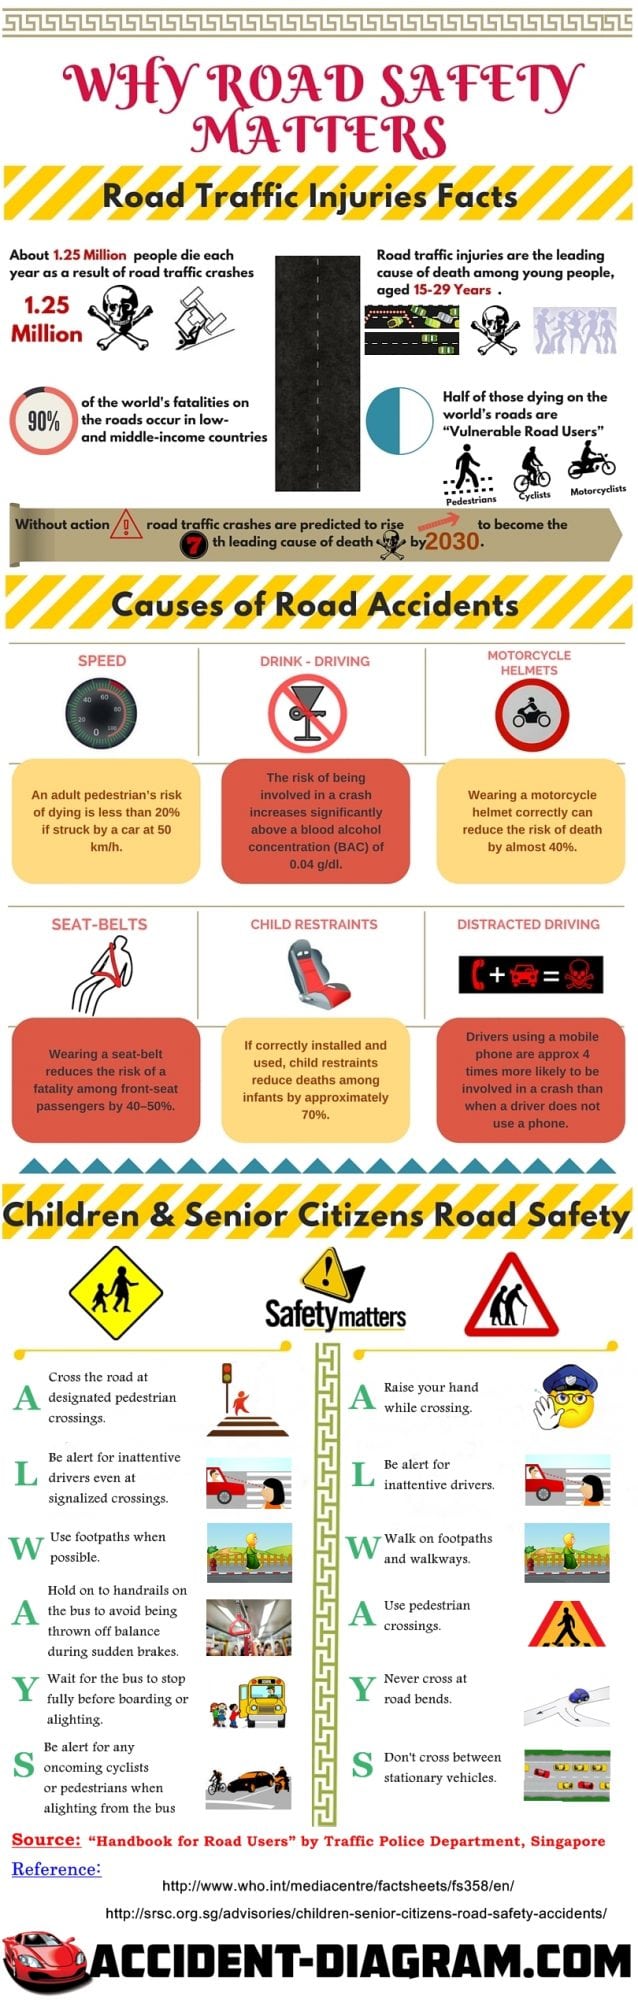 Why Road Safety Matters- An infographic